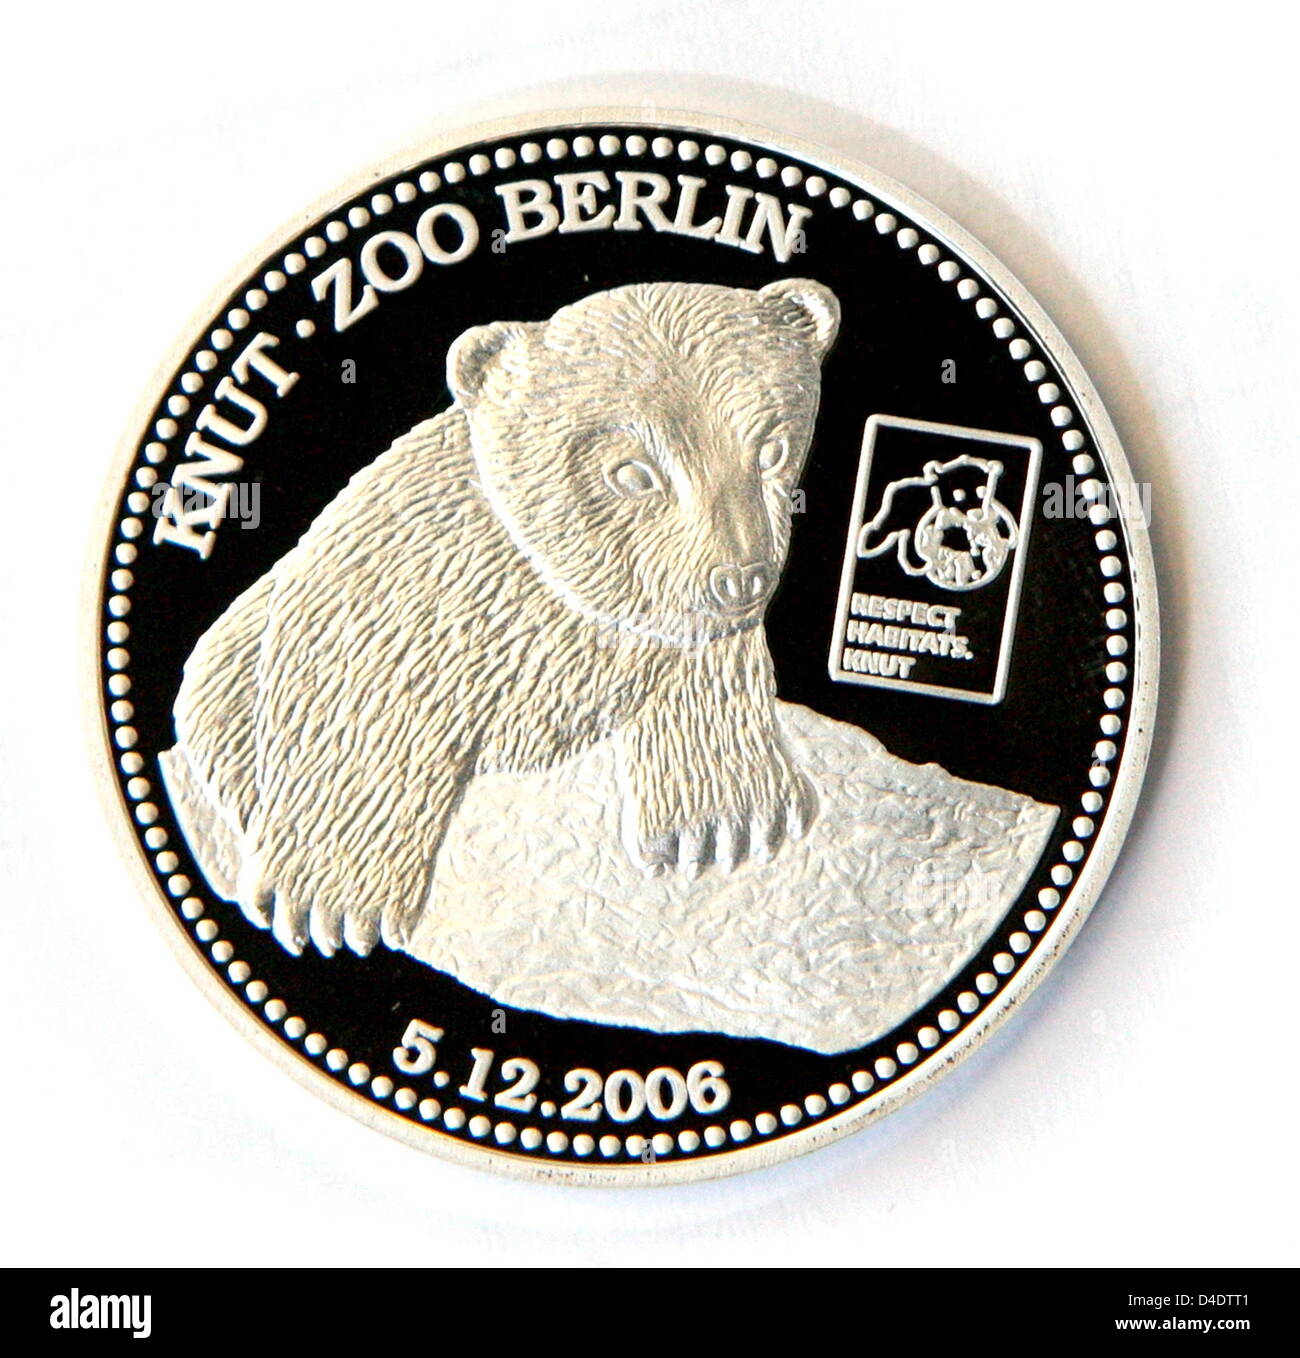 The  picture shows the back of special 'Knut' medal in Berlin, Germany, 24 April 2008. The medal was made on the occasion of the birth of the polar bear cub. It is now investigated if the medal breaks a federal law that only permits eagles to be engraved on coins only. Photo: KLAUS -DEITMAR GABBERT Stock Photo